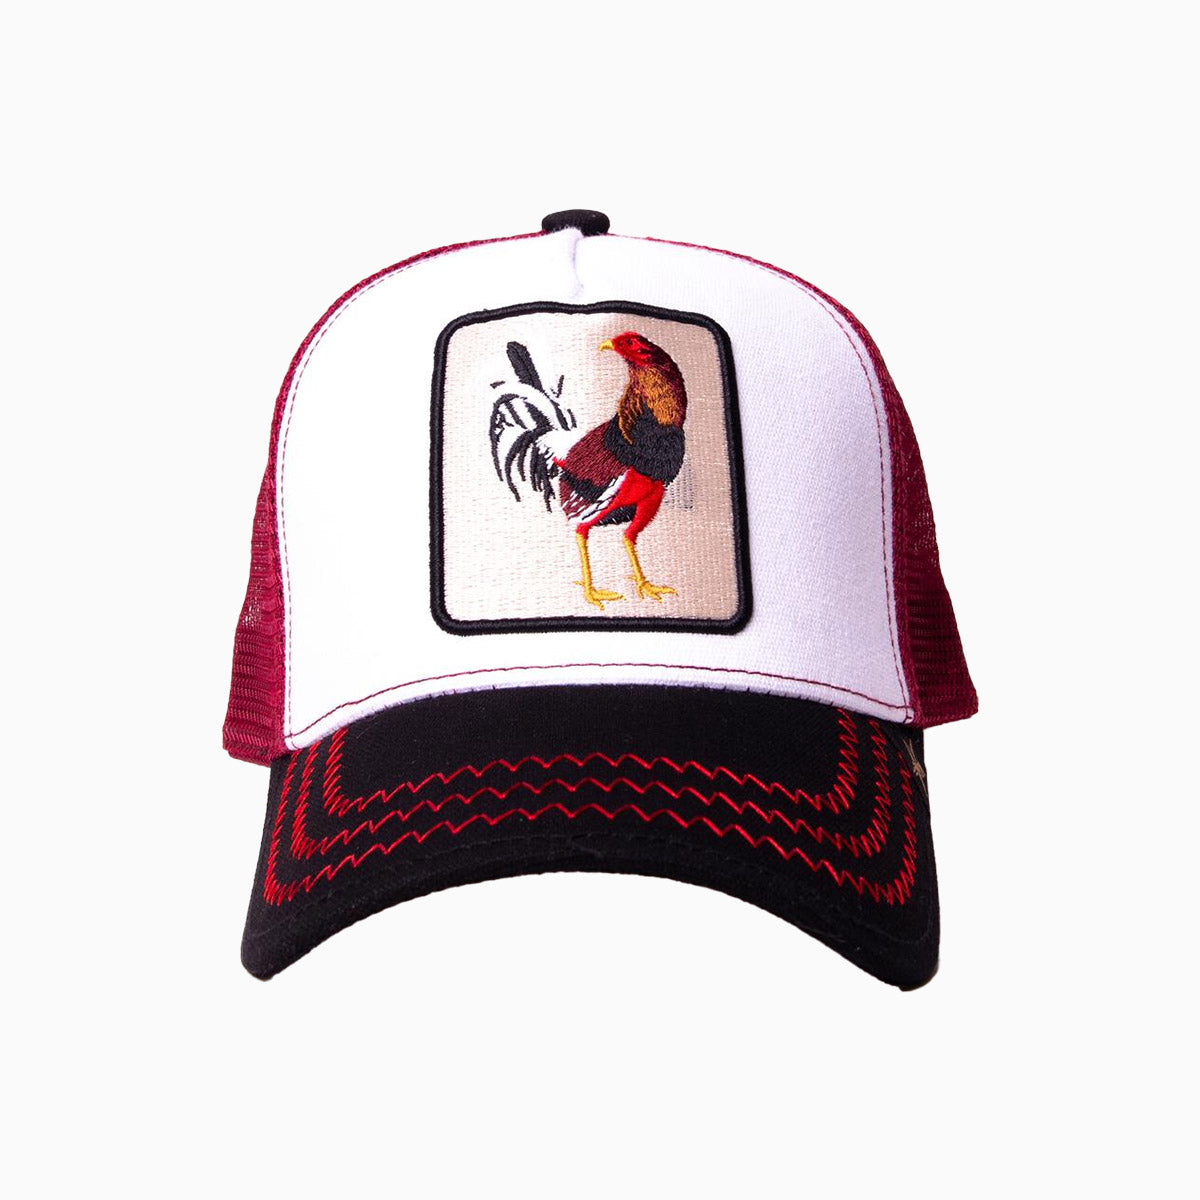 gold-star-hats-the-rooster-white-burgundy-trucker-hat-rs001-white